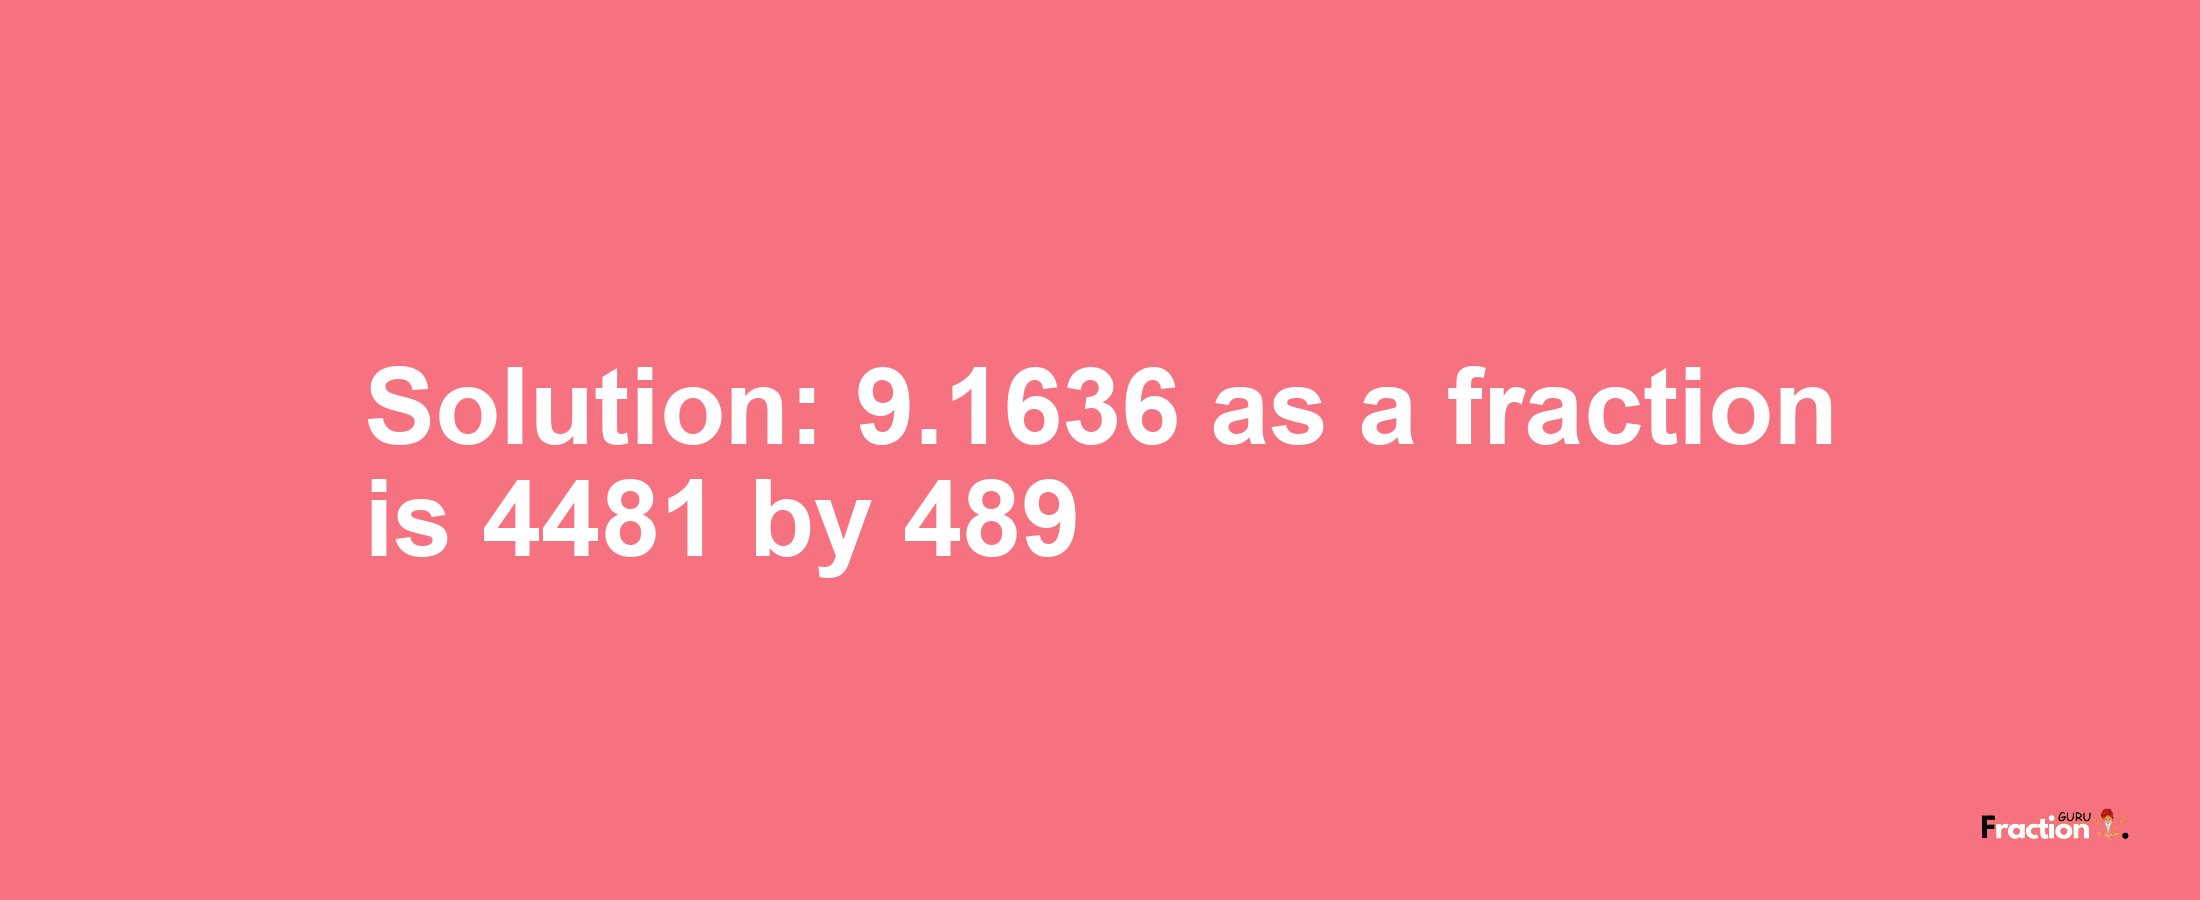 Solution:9.1636 as a fraction is 4481/489